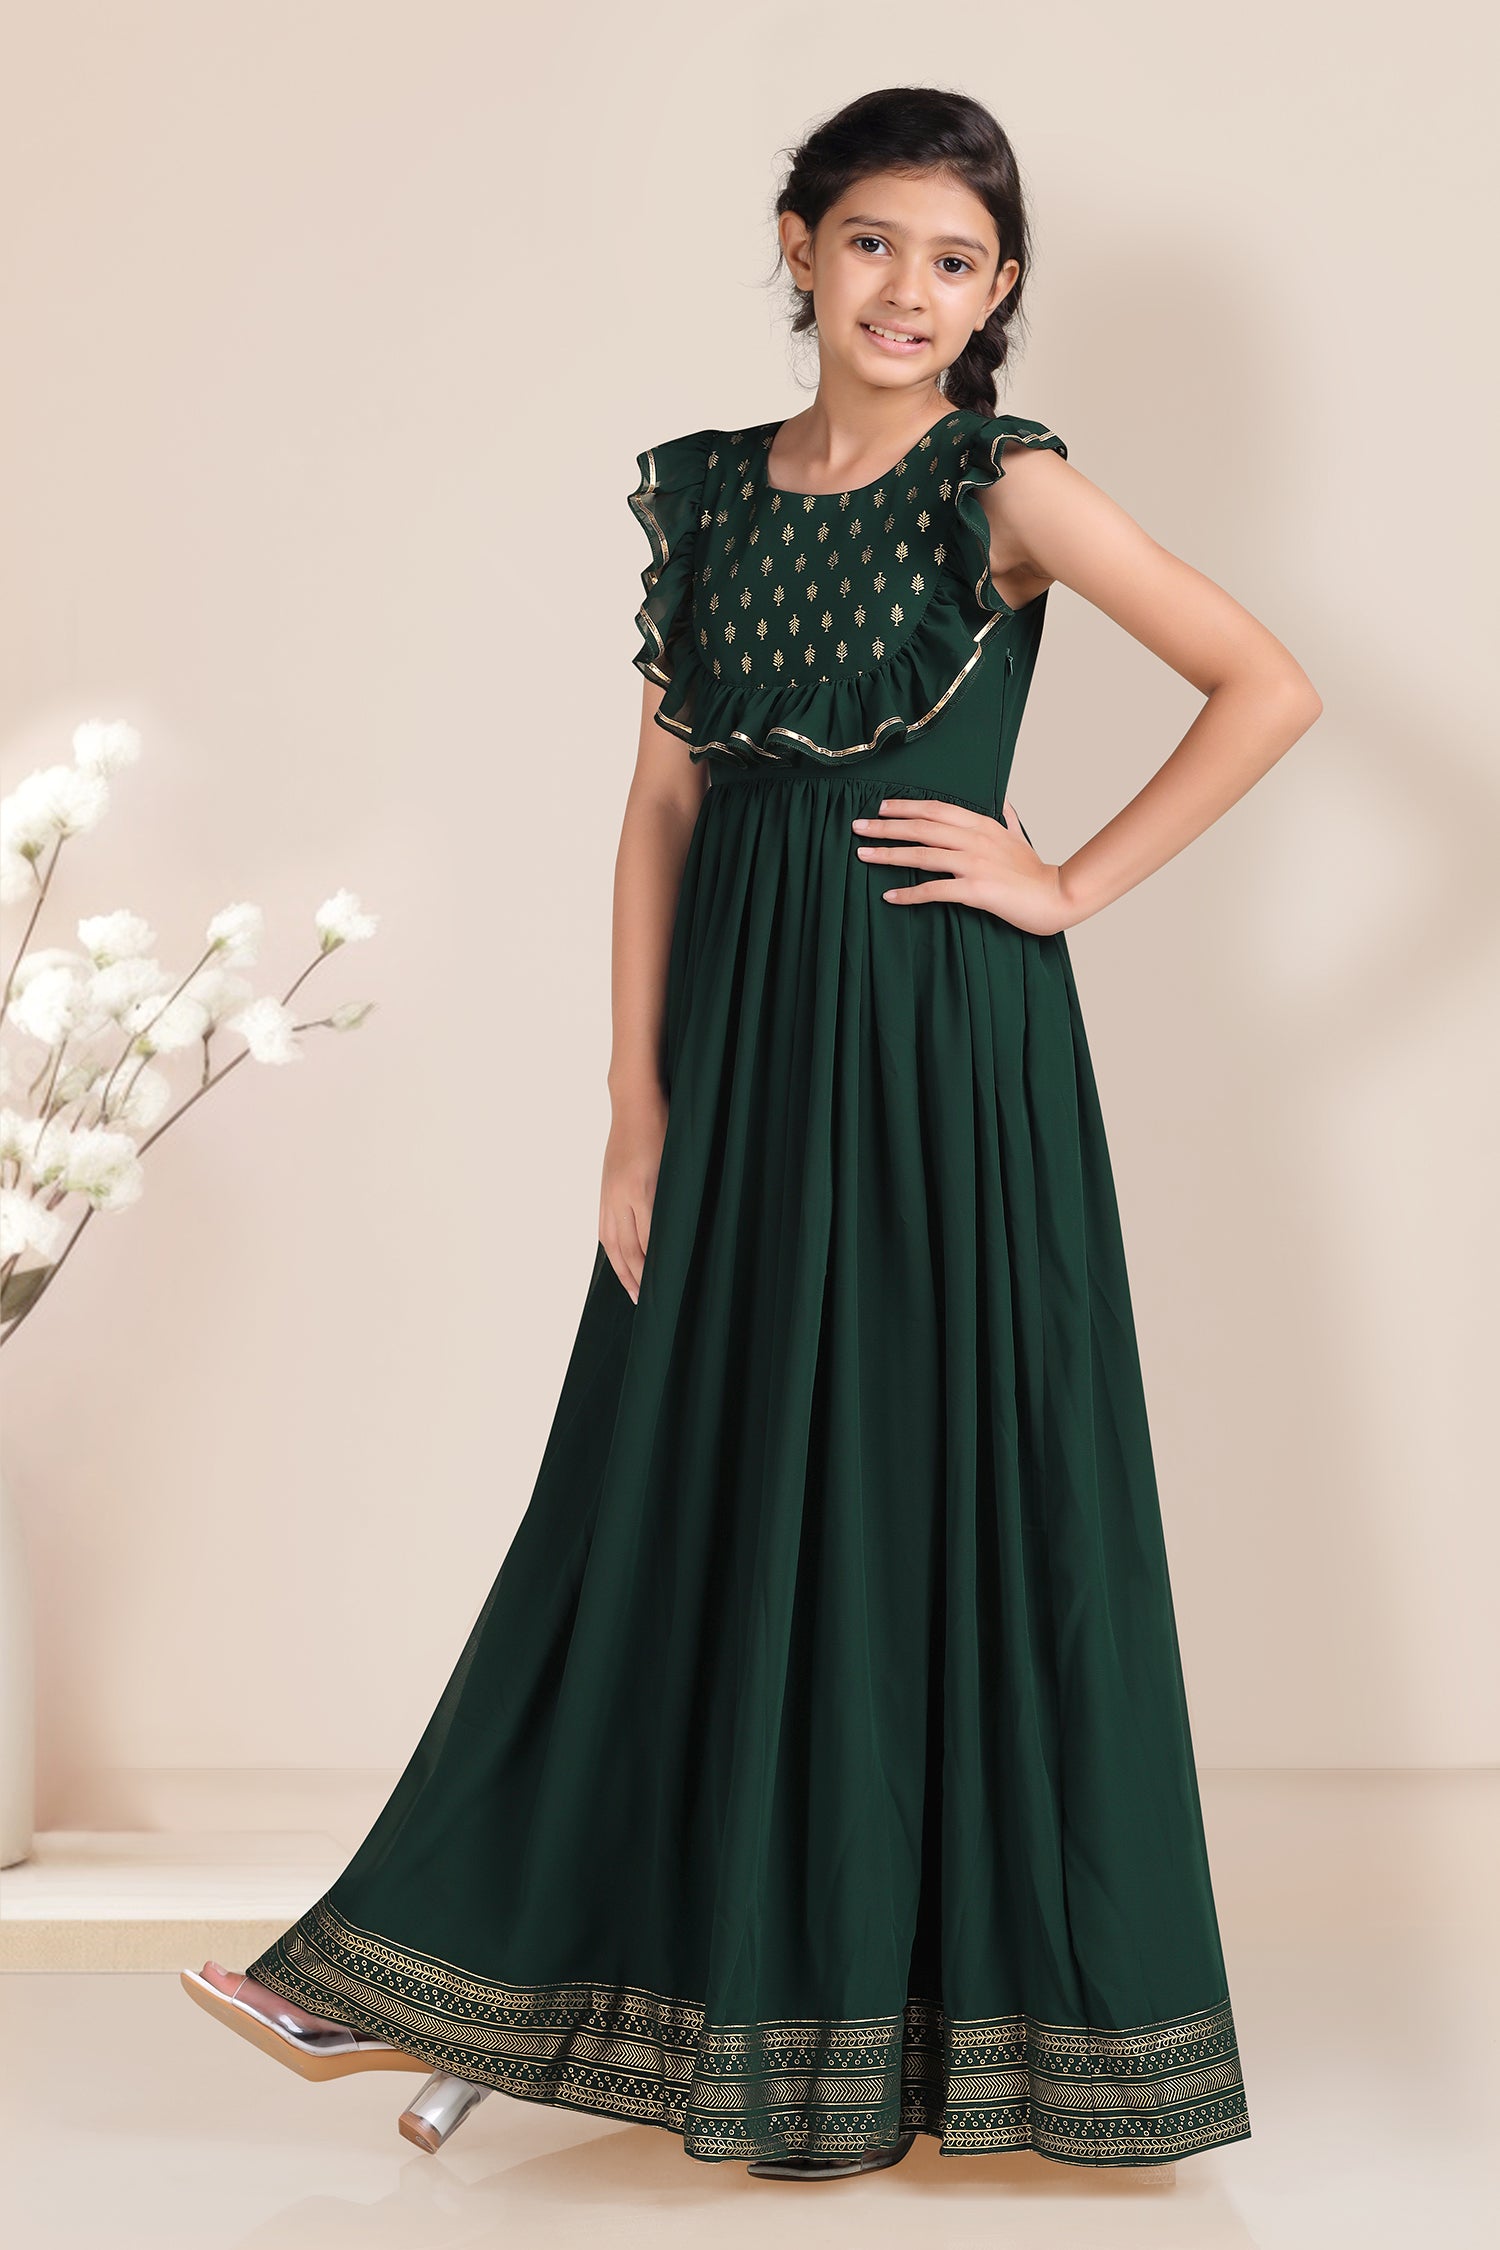 Bottle Green Puff Long Sleeve Muslim Elegant Evening Dresses For Ladies  Luxury Hight Neck Formal Occasion Dress Beaded Appliques - AliExpress